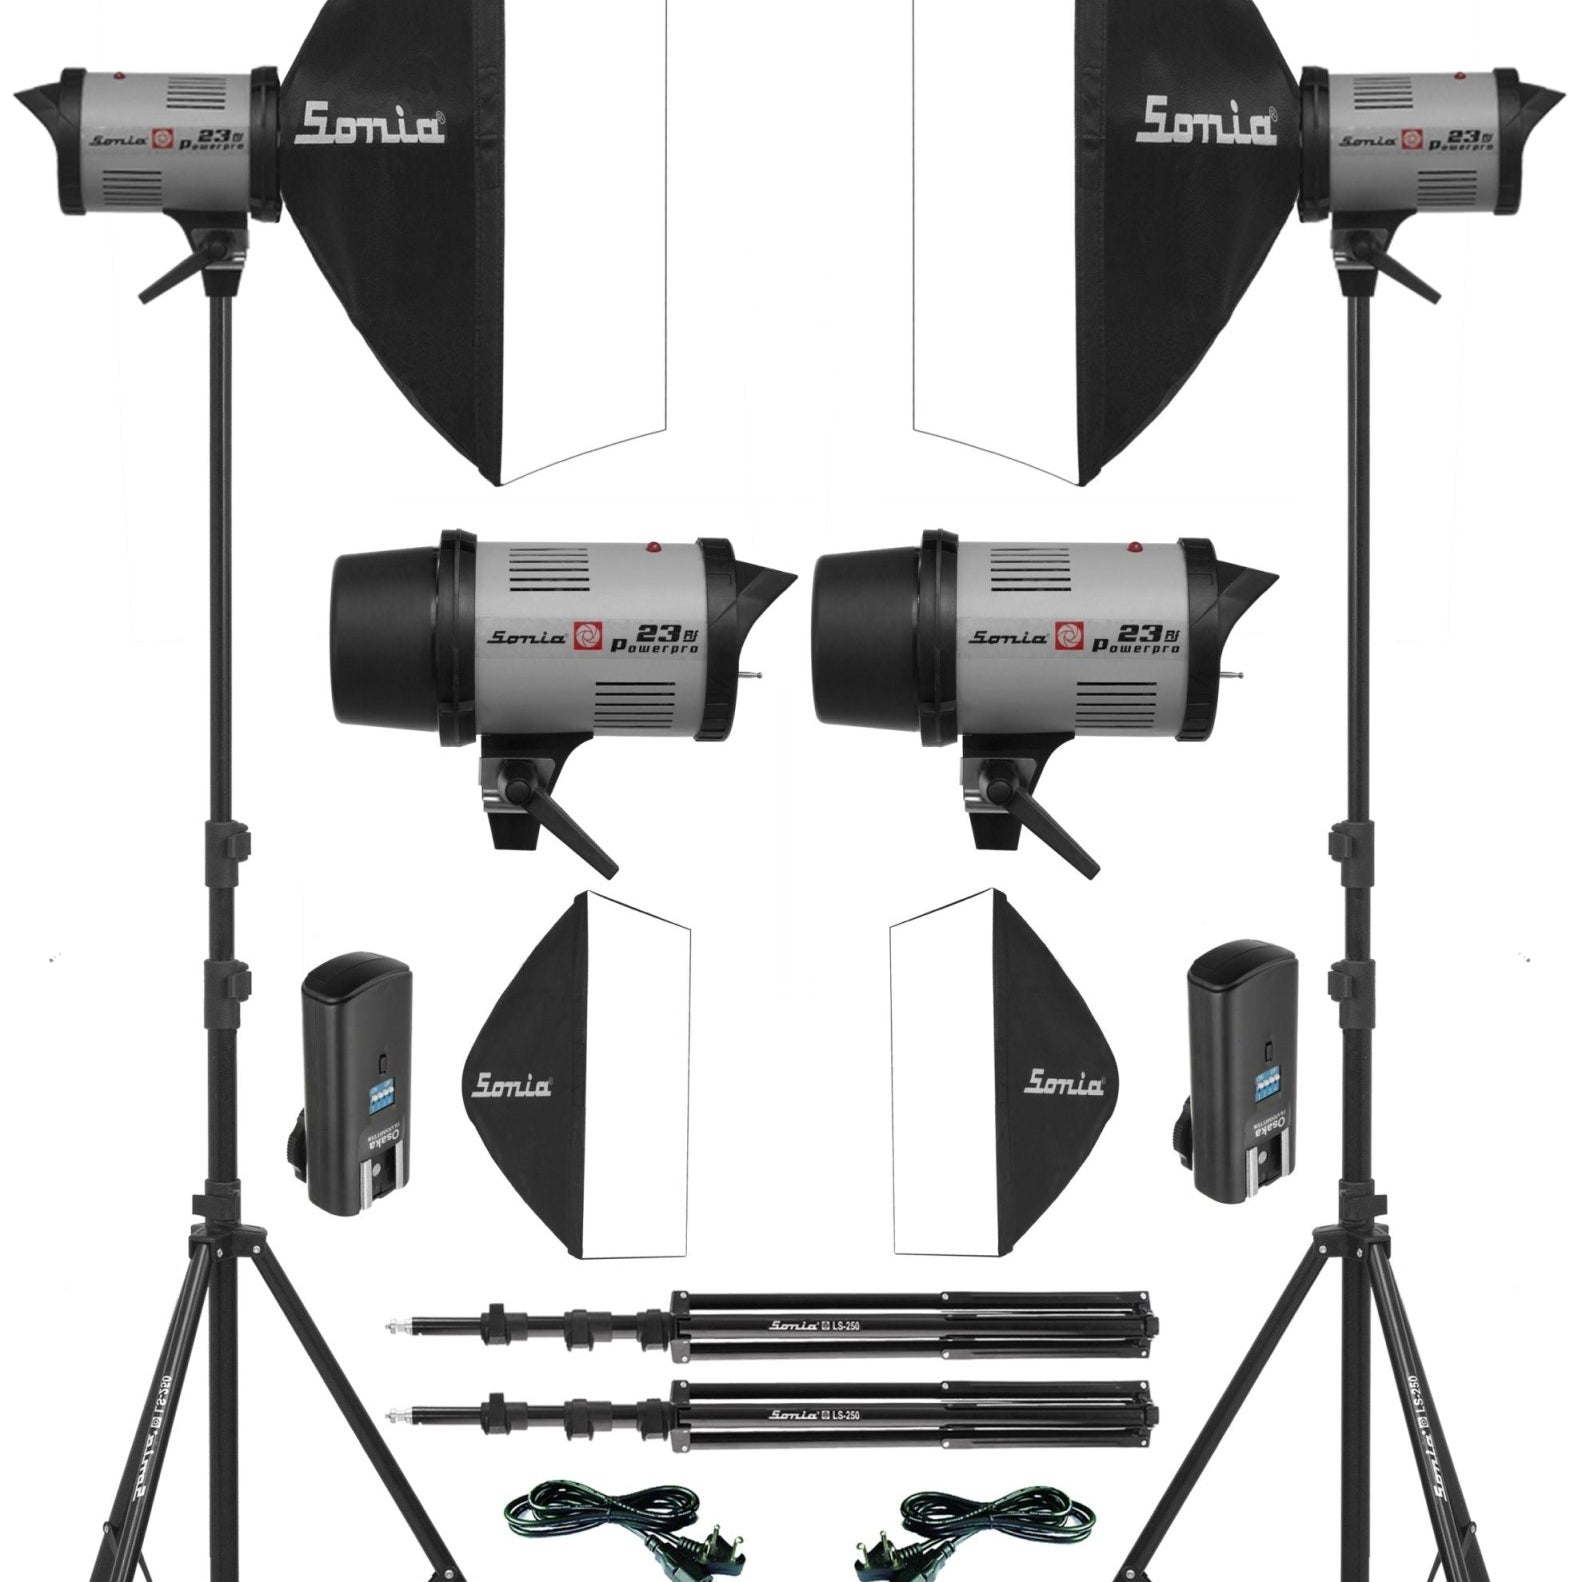 Sonia Studio Light Powerpro 23RF Kit with Double Diffuser Soft Box; Transmitter; Carry Case & Light Stand - The Camerashop